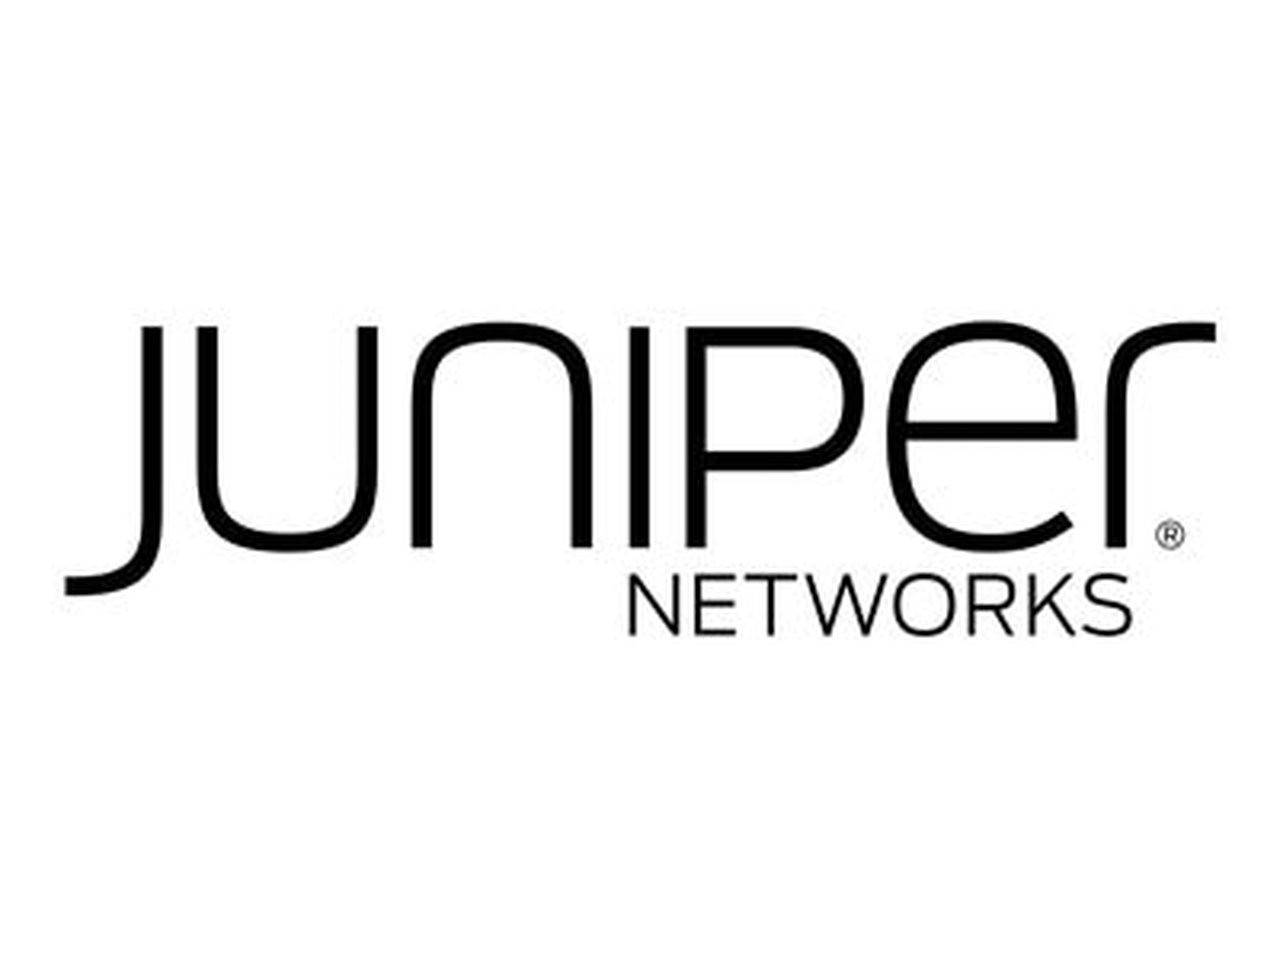 Juniper Professional Service Credits-50 credit block. Credit is good for a one year period. Consumption of credits follows standard Professional Services processes. Professional Services must be delivered within 12 month period.